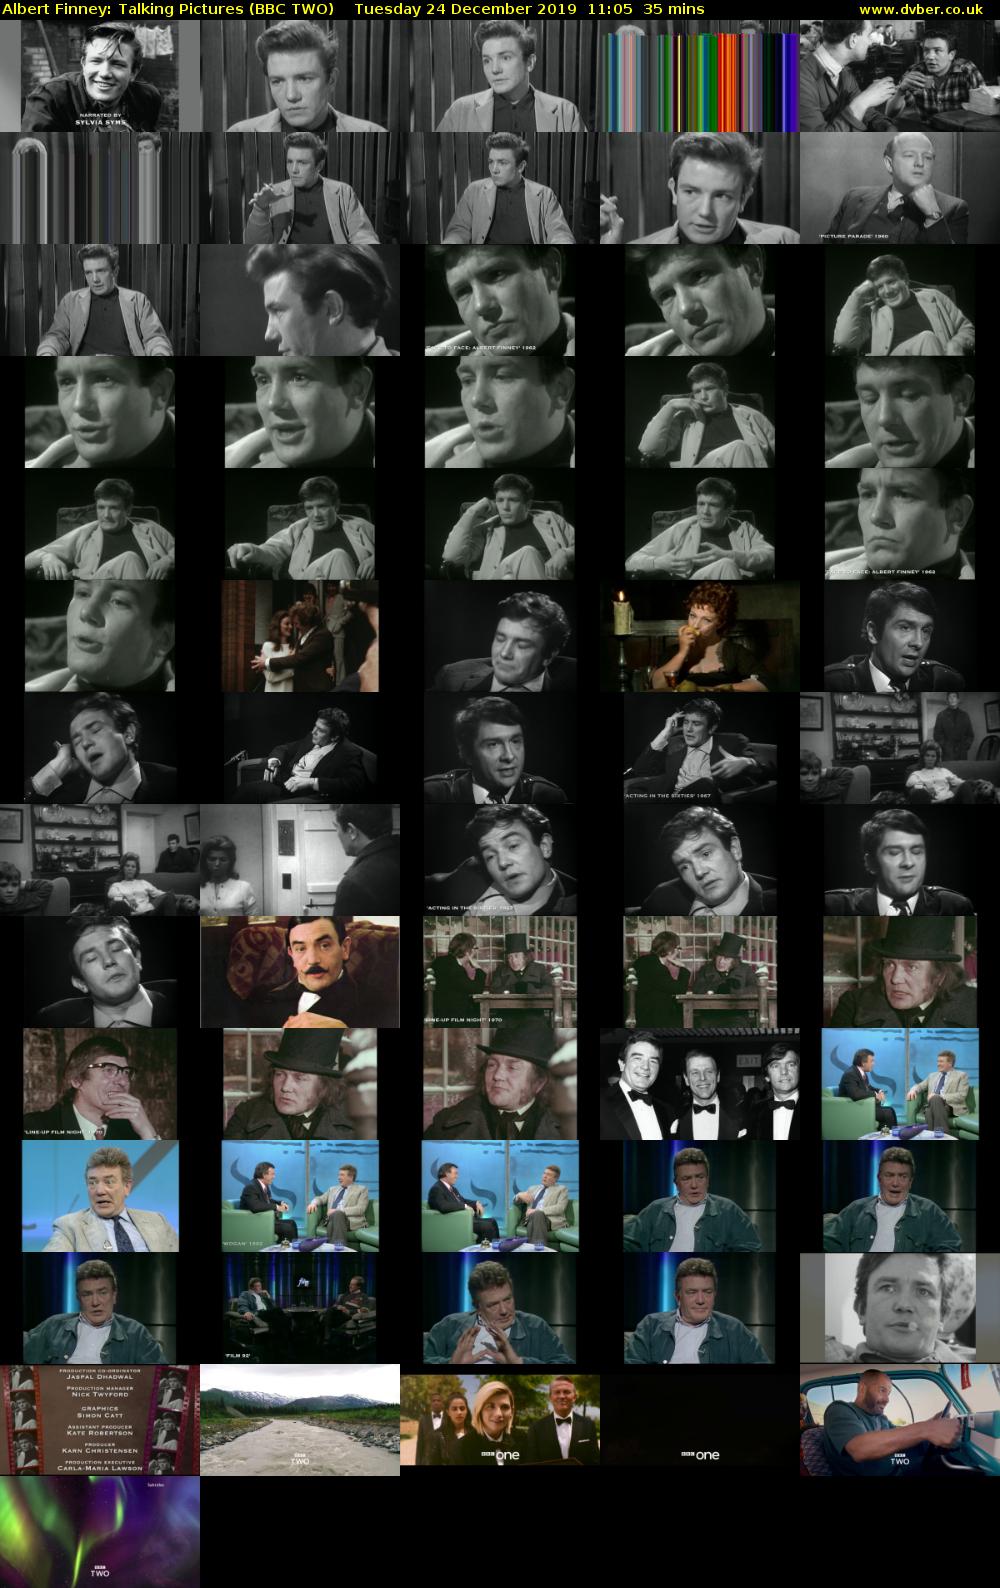 Albert Finney: Talking Pictures (BBC TWO) Tuesday 24 December 2019 11:05 - 11:40